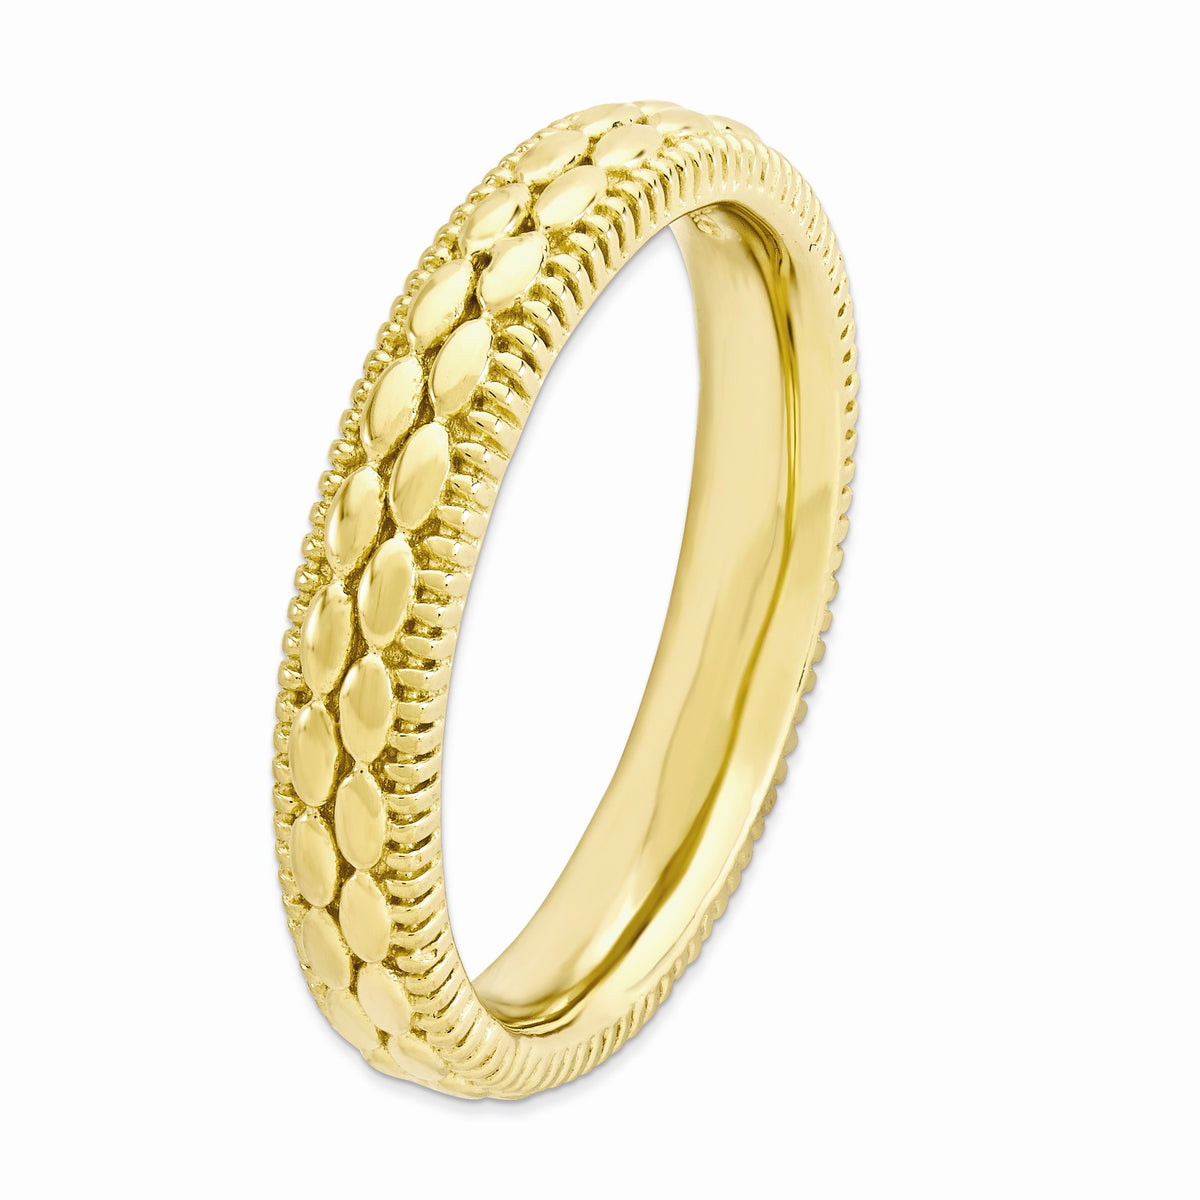 Alternate view of the 3.5mm 14k Yellow Gold Plated Sterling Silver Stackable Patterned Band by The Black Bow Jewelry Co.